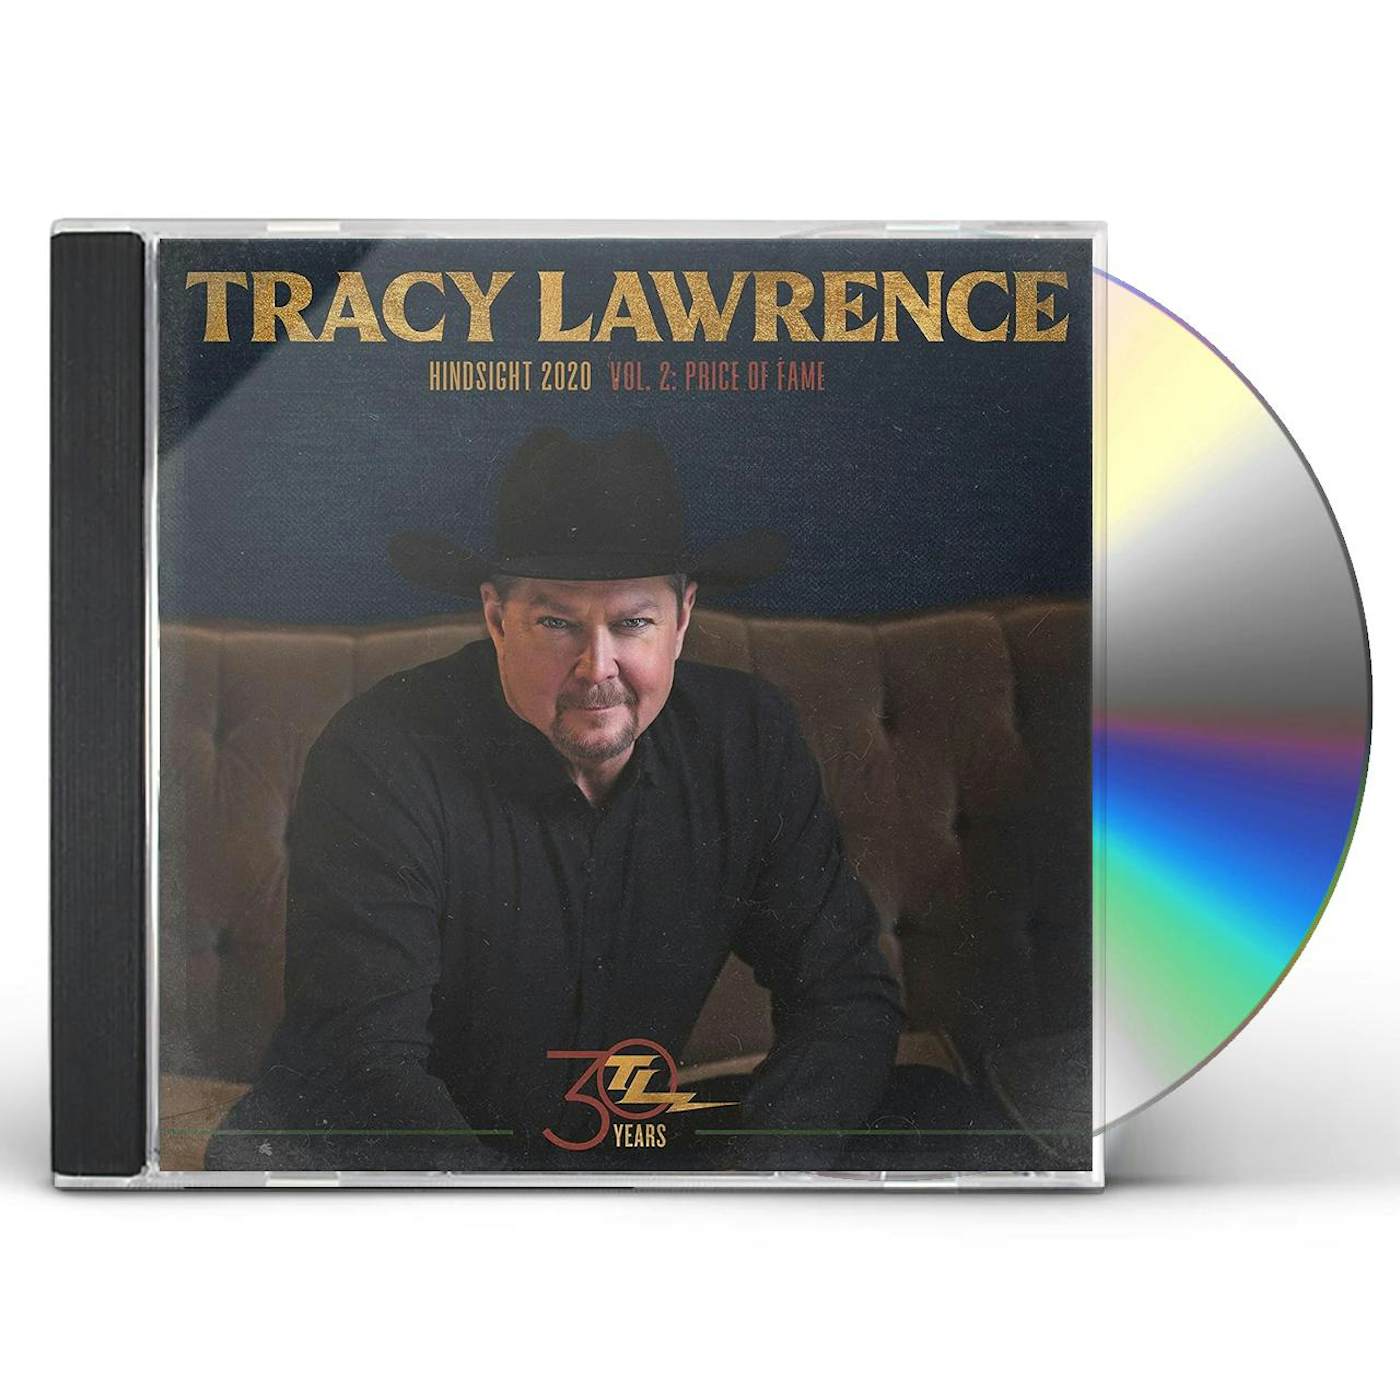 Tracy Lawrence HINDSIGHT 2020, VOL 2: PRICE OF FAME CD